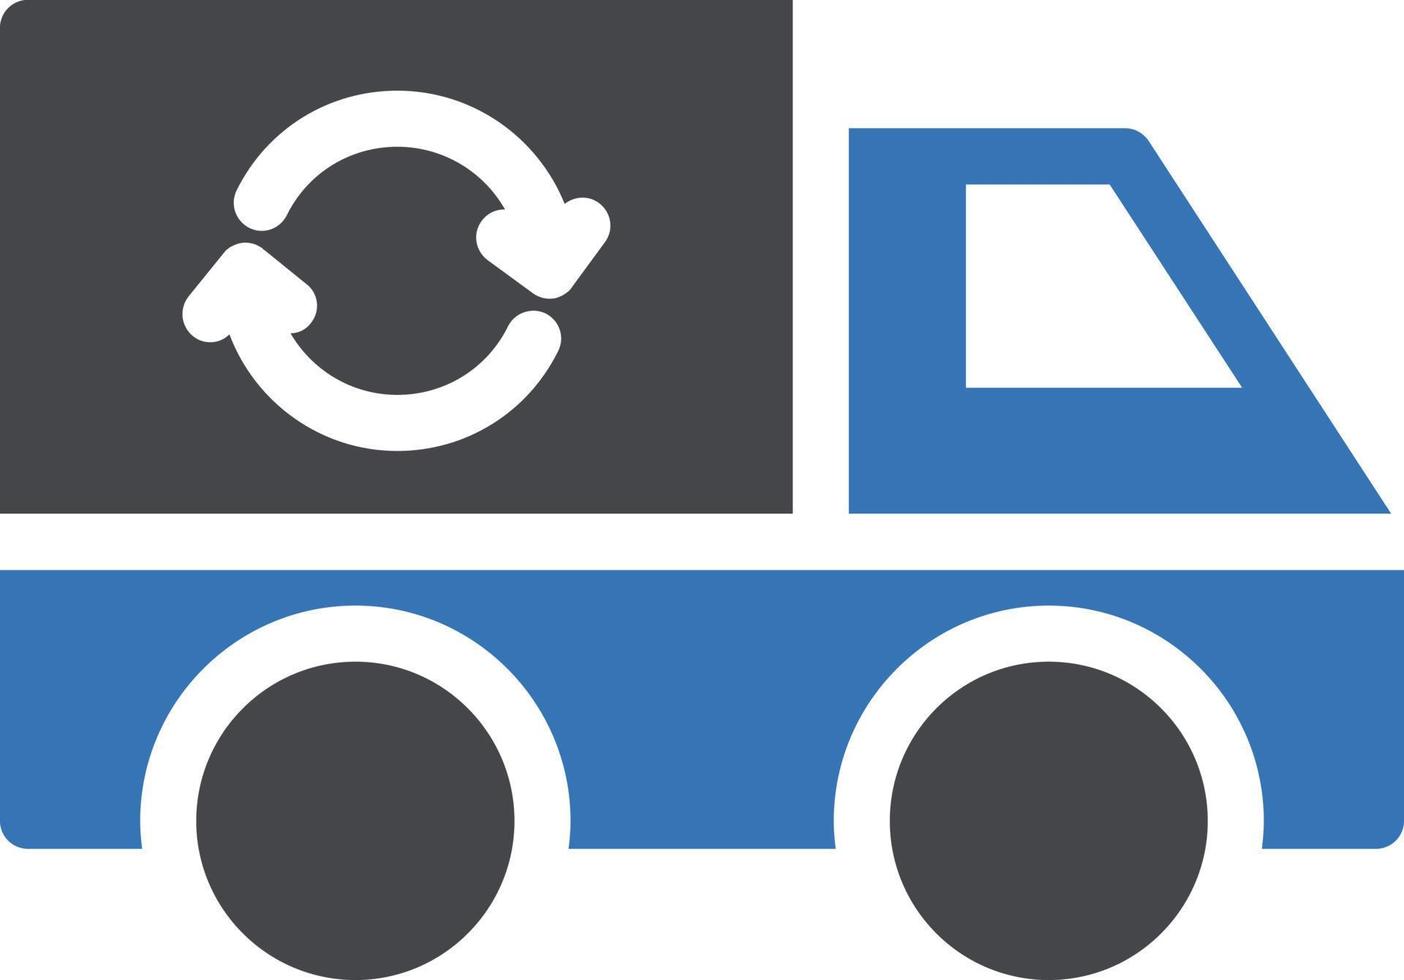 recycle bin truck vector illustration on a background.Premium quality symbols.vector icons for concept and graphic design.